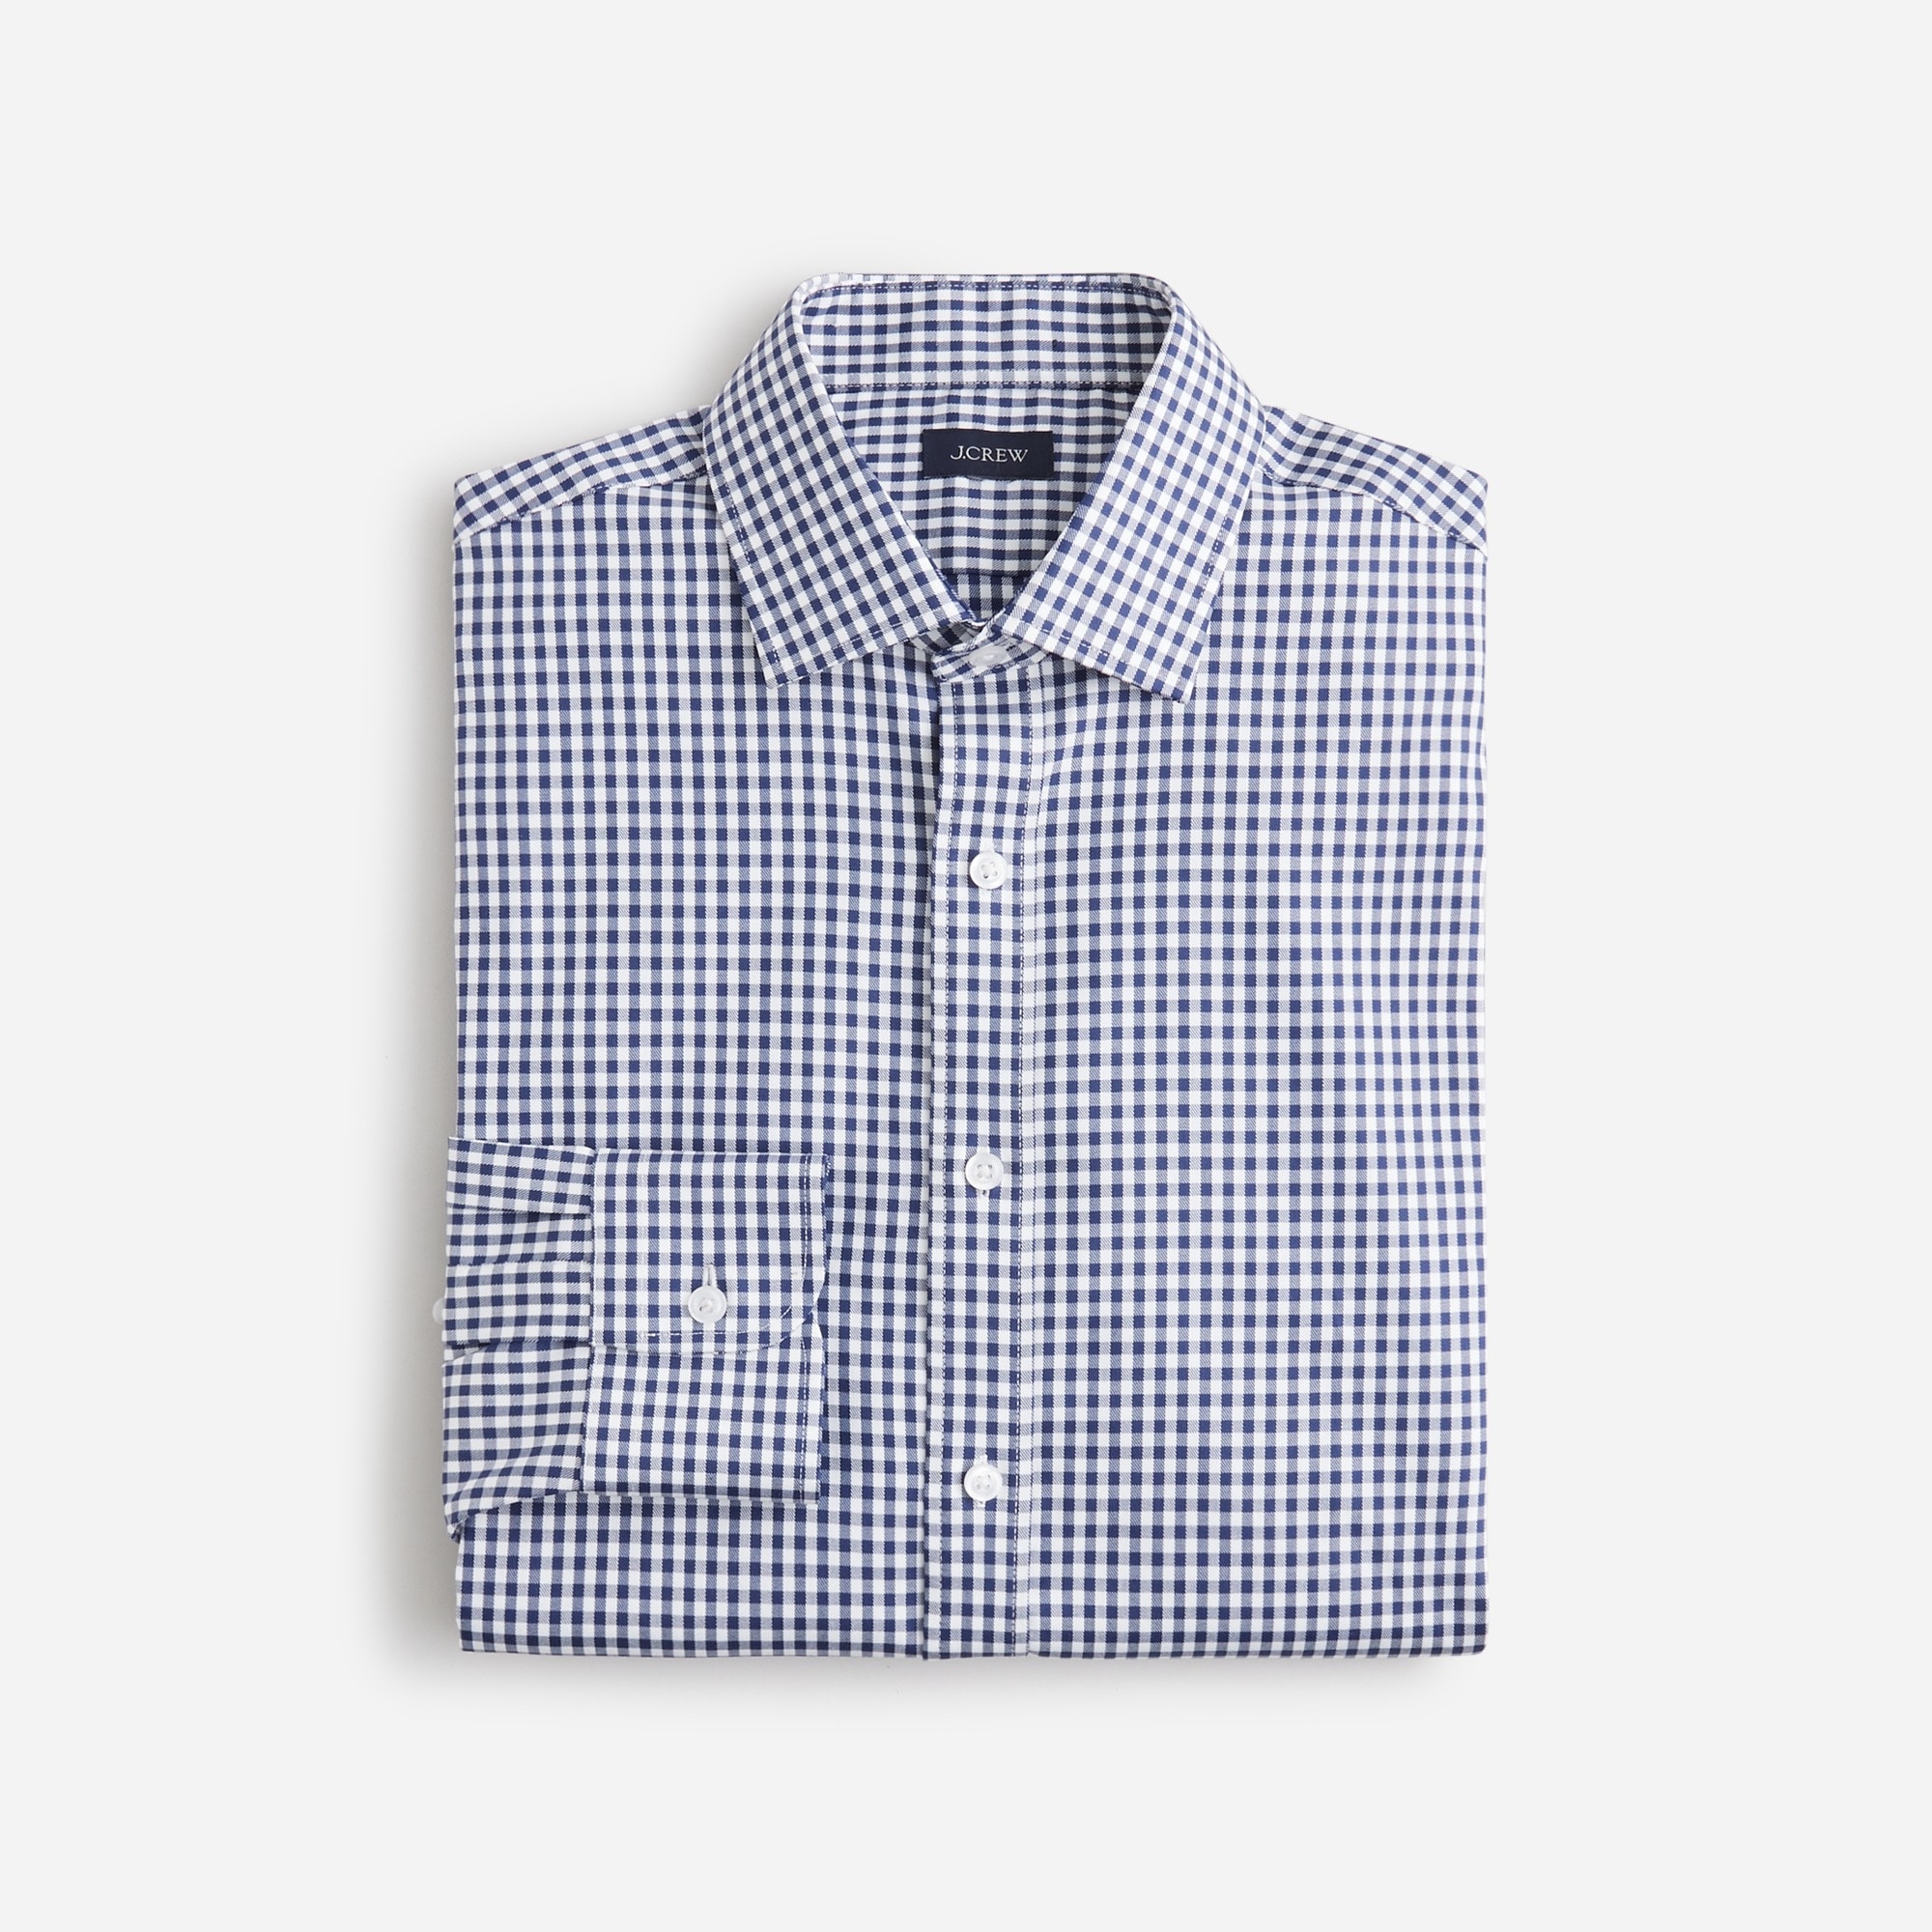  Bowery performance stretch dress shirt with spread collar